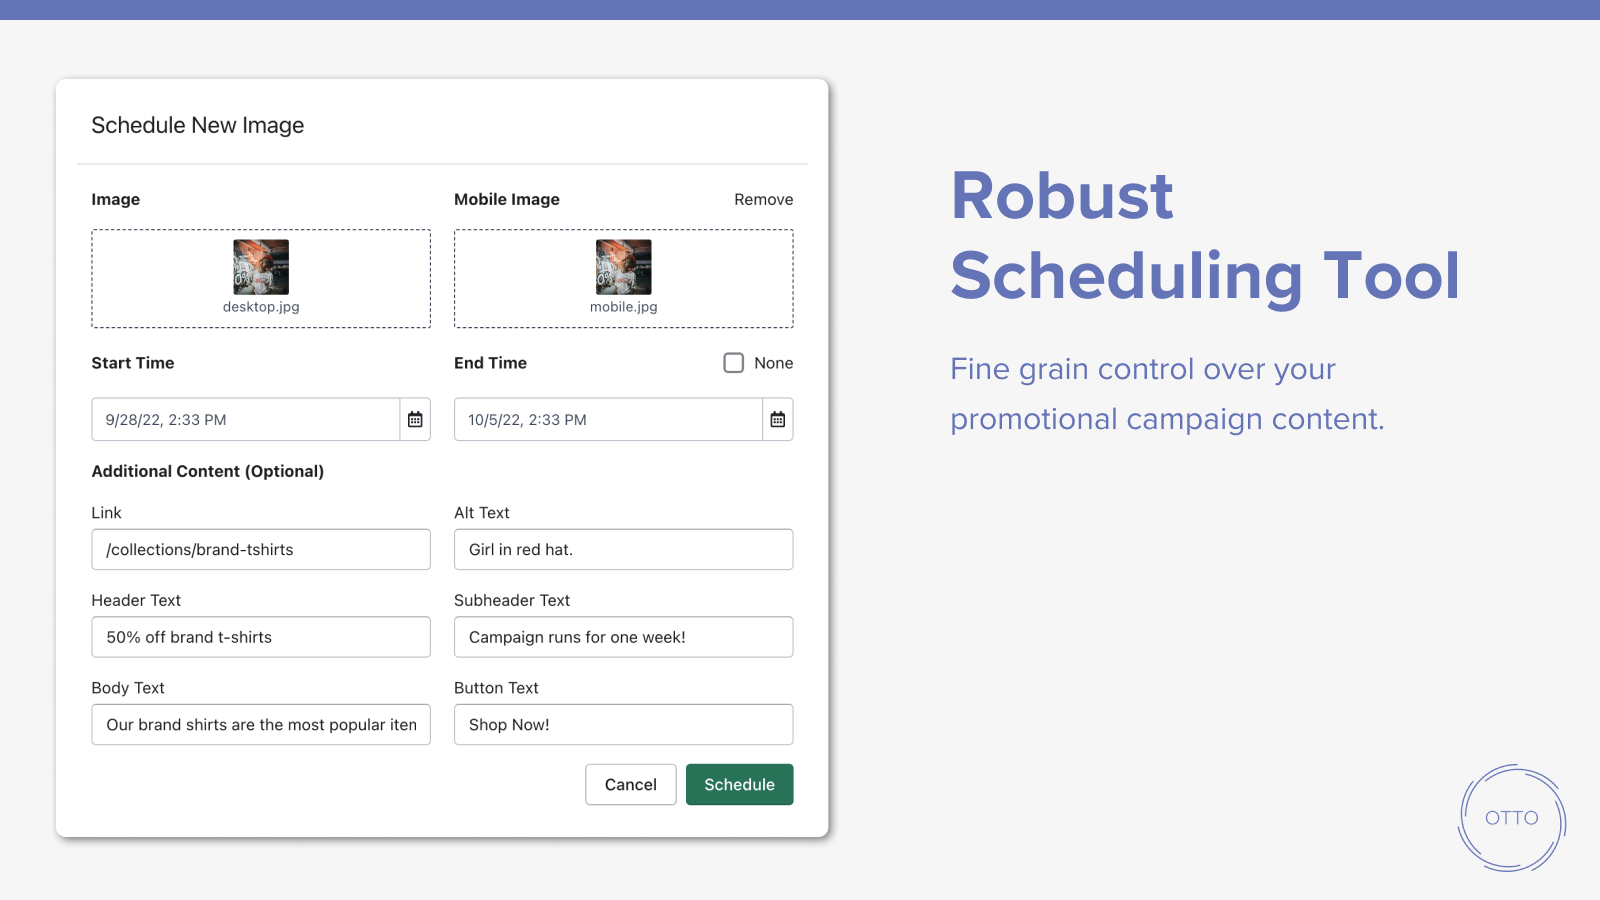 Robust scheduling tool.